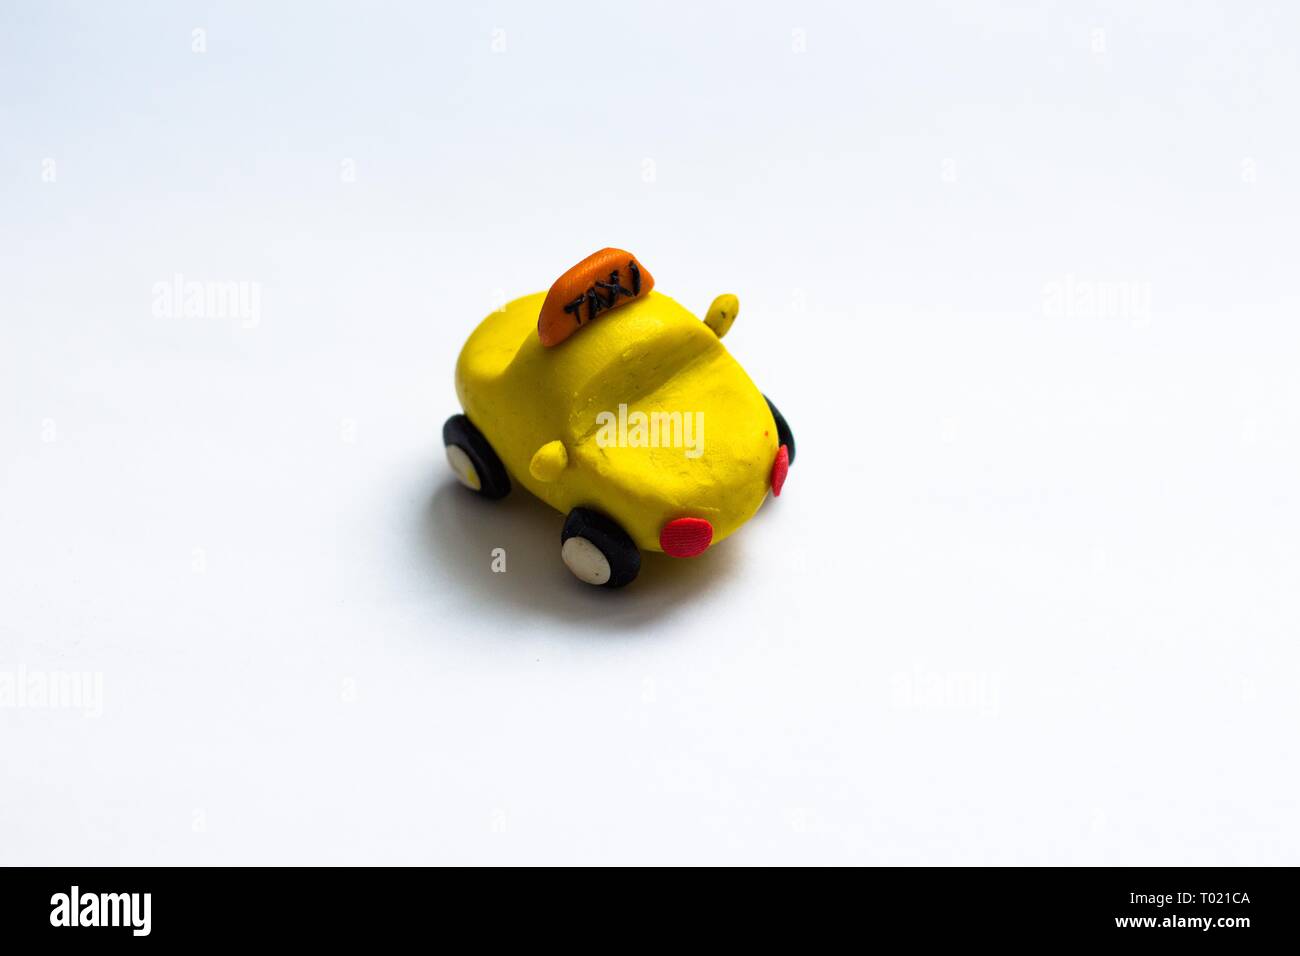 A small yellow cab made of plasticine stands on a white background. The car wheels are black and red headlights. Stock Photo